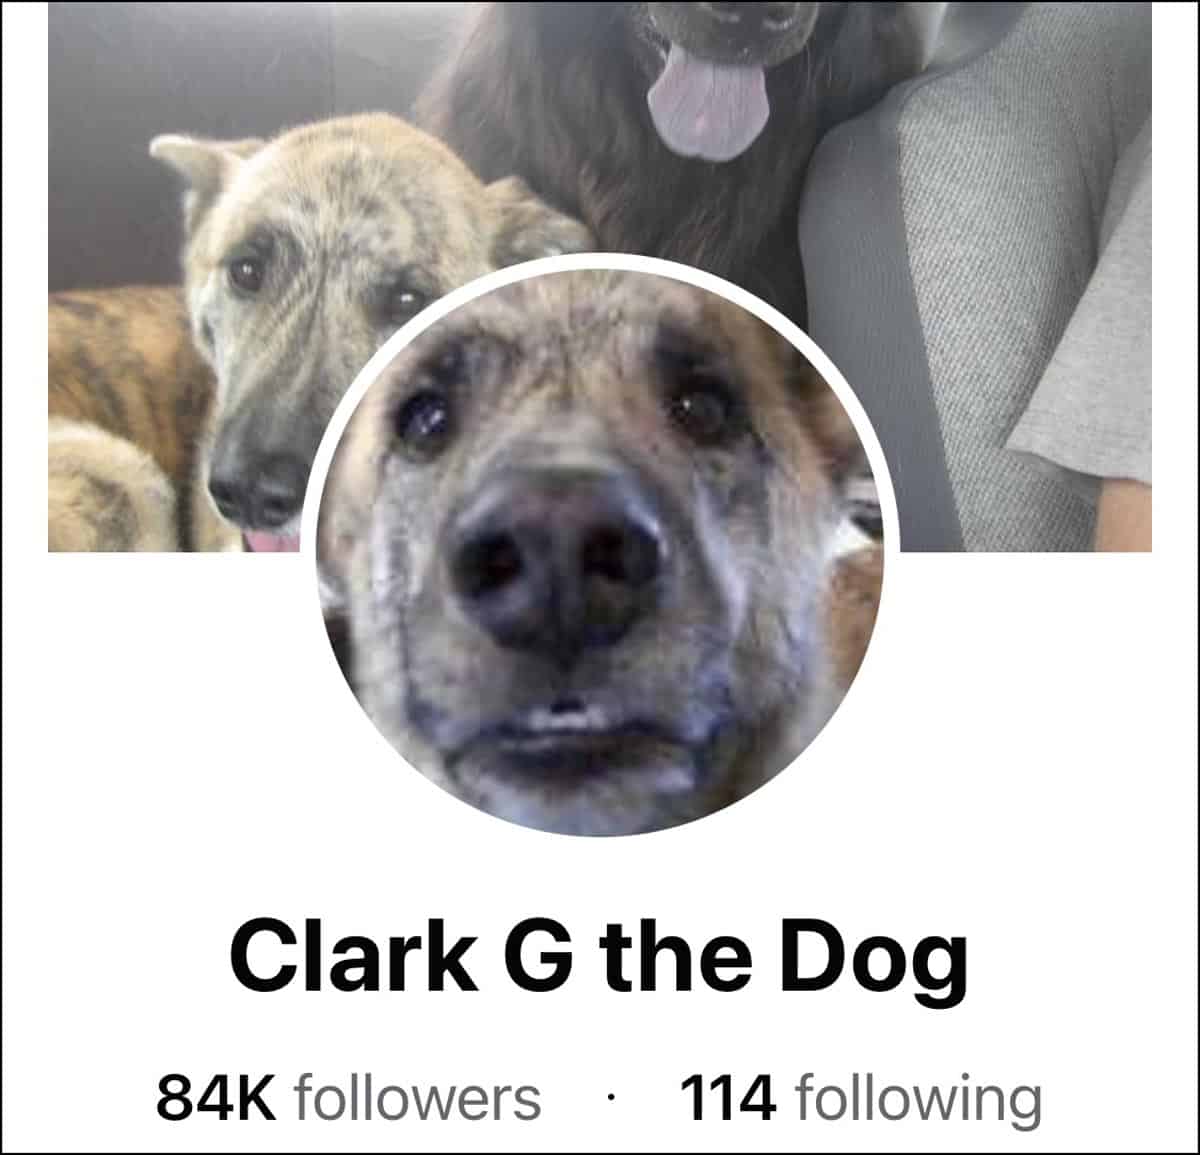 A screenshot of the Facebook page for Clark G the Dog.